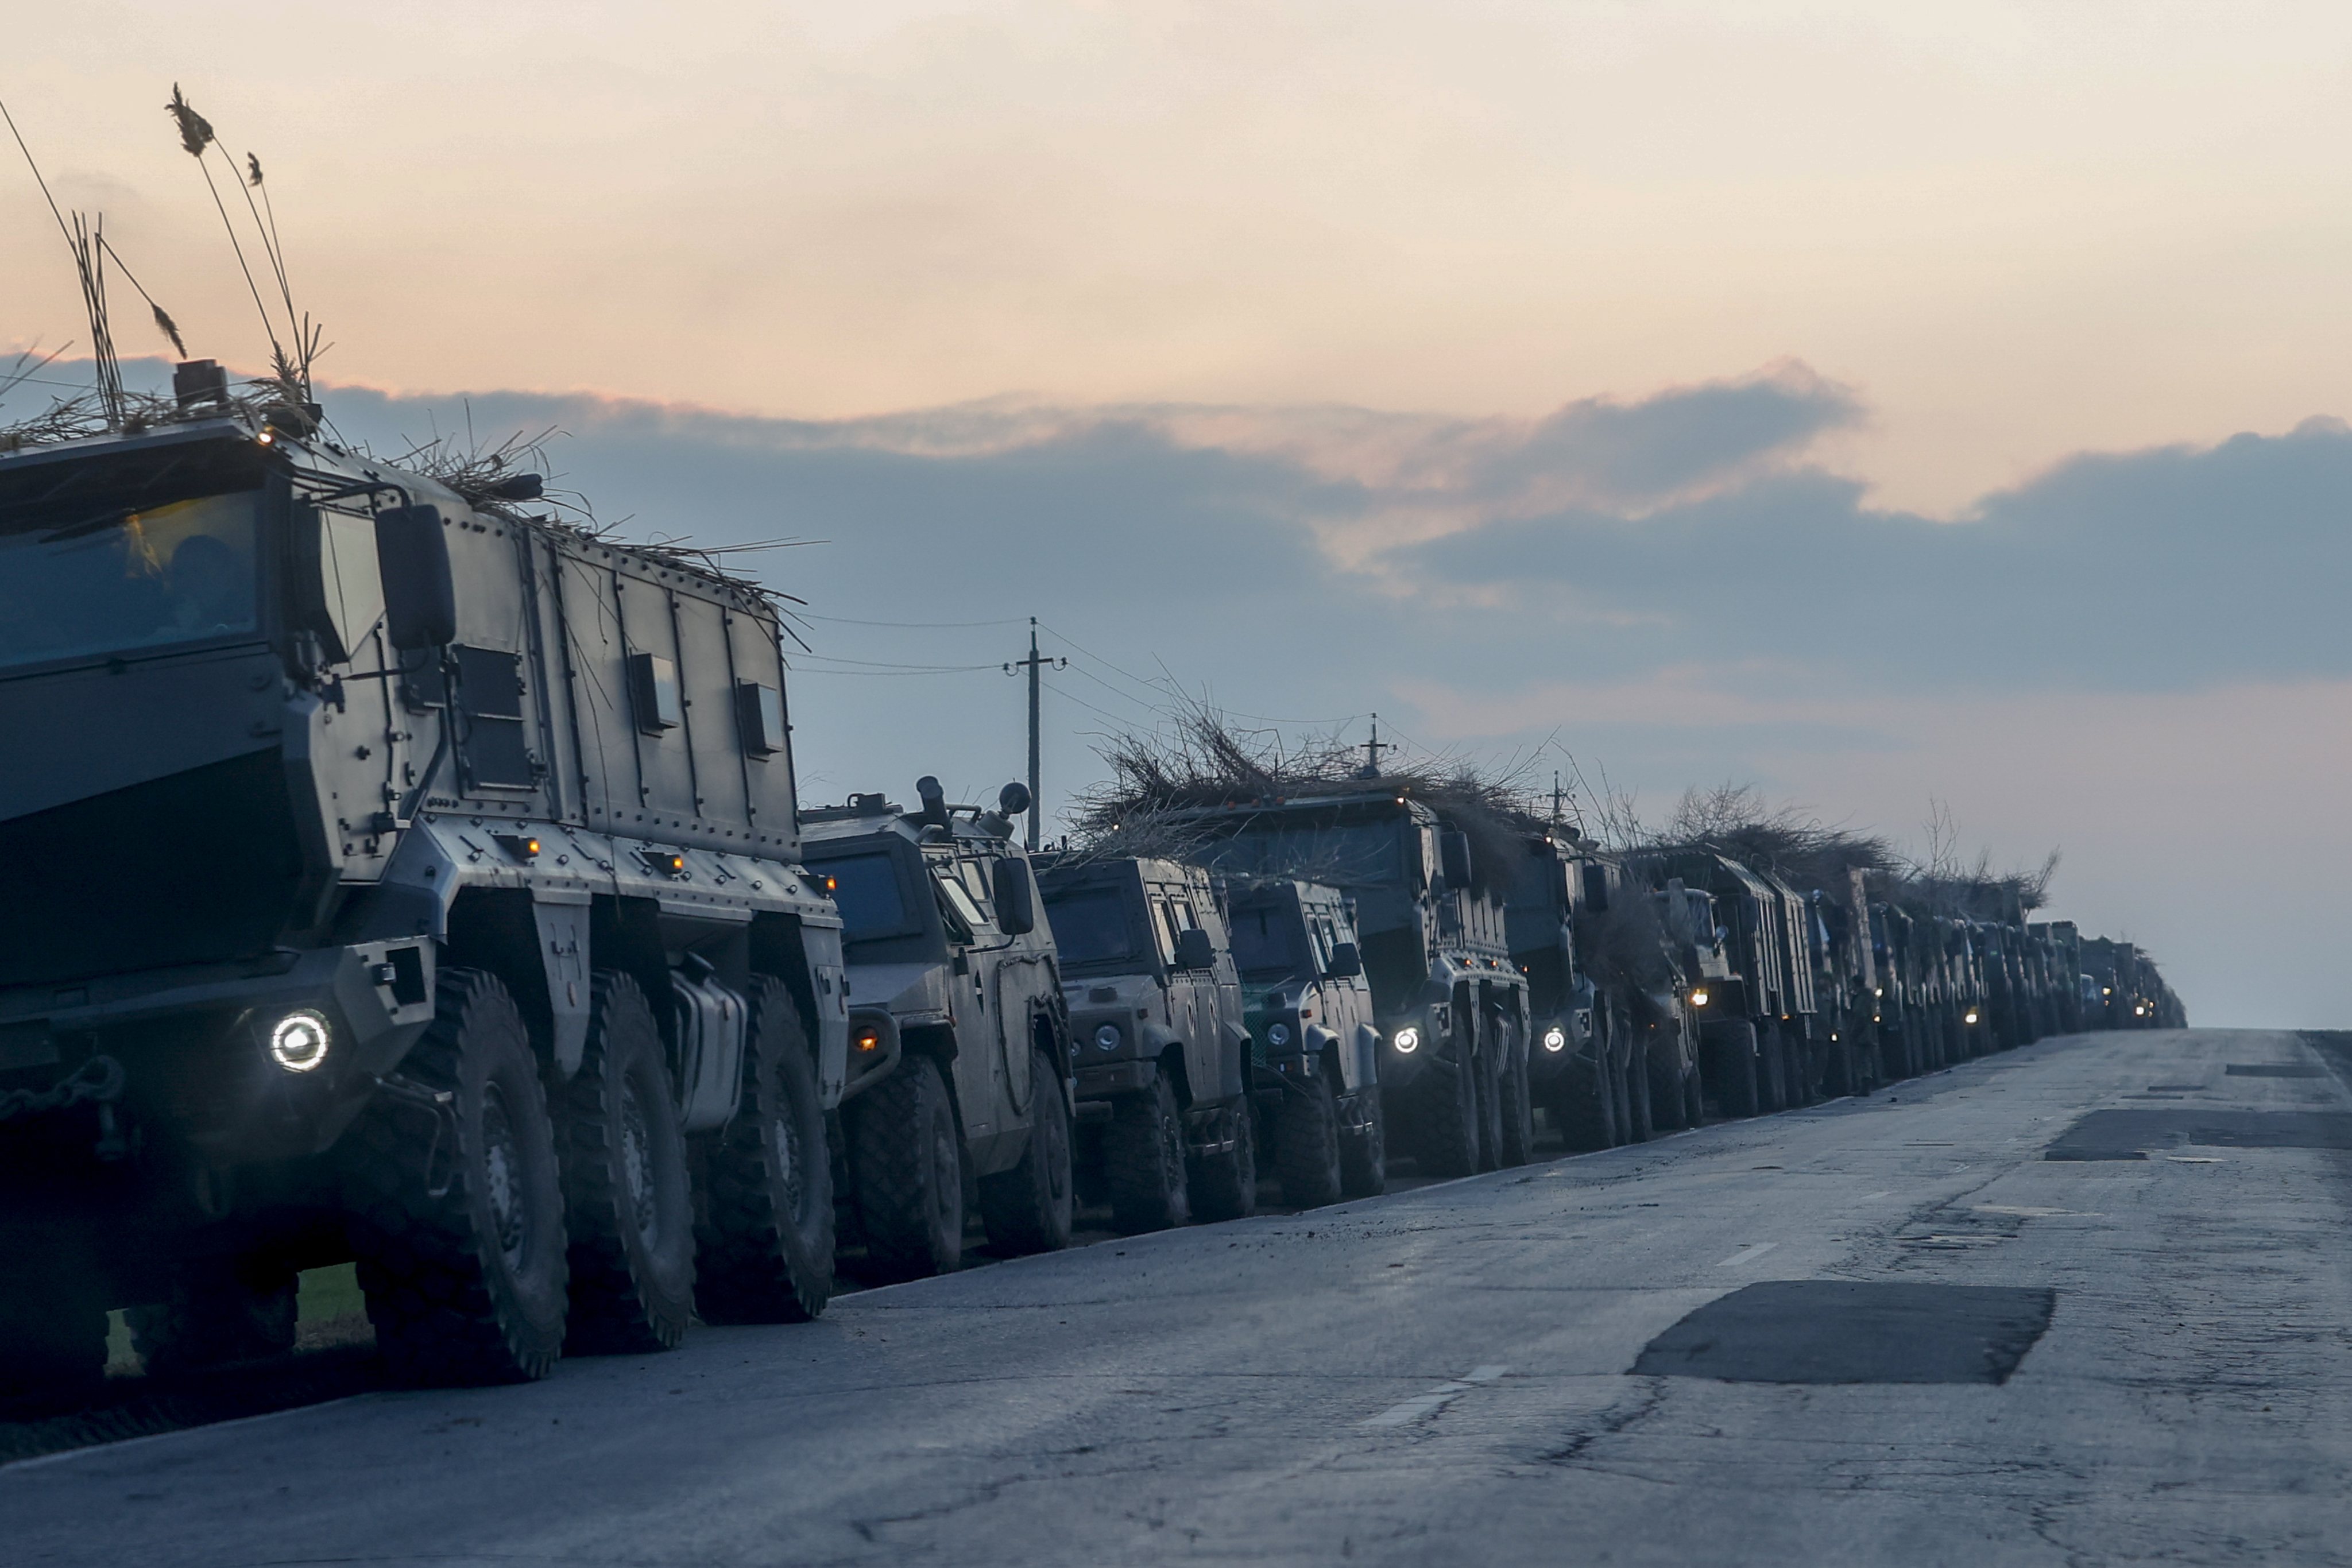 A convoy of Russian military vehicles moving towards border in Donbas region